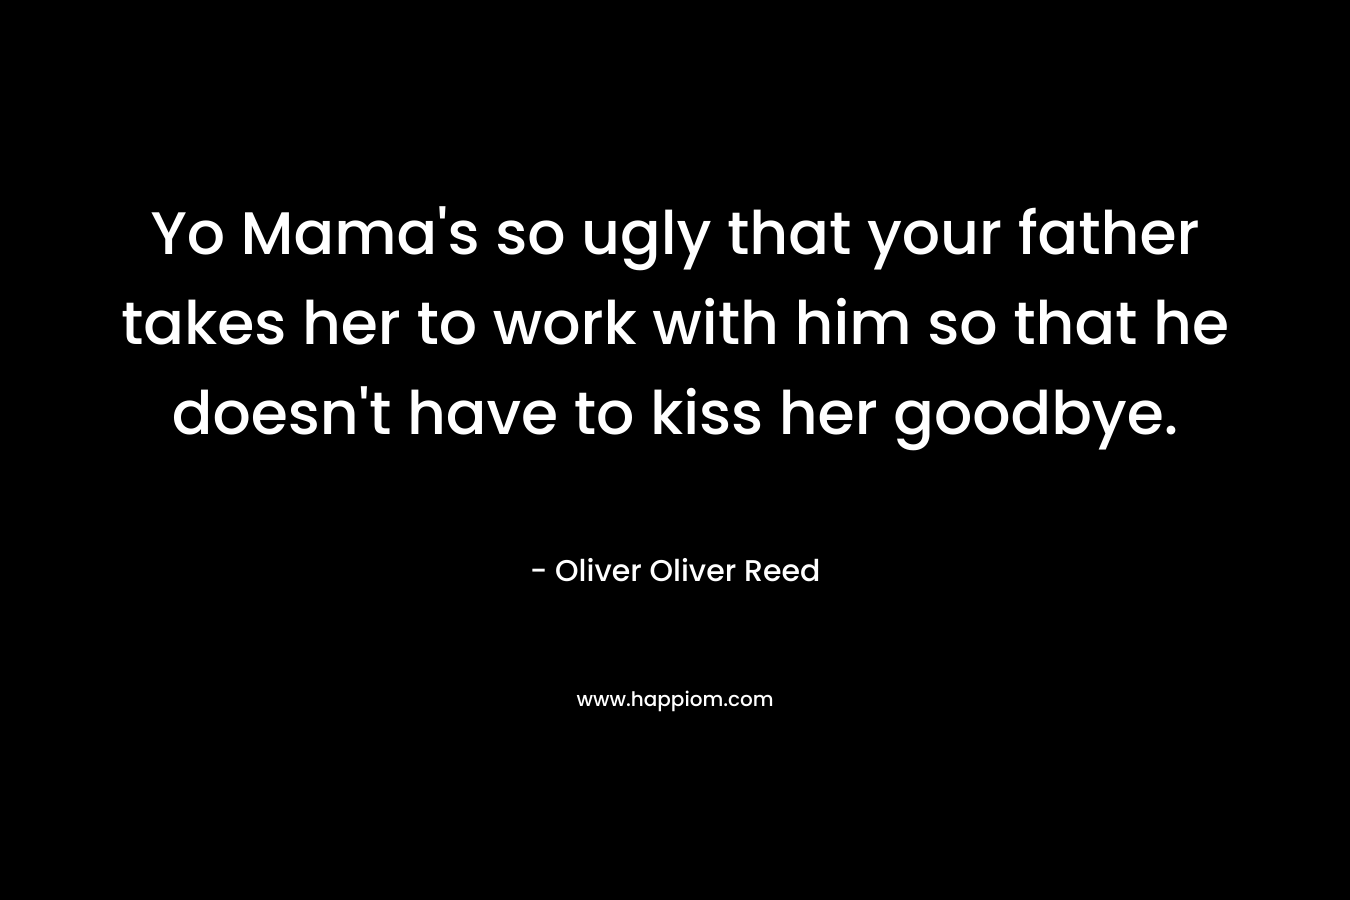 Yo Mama's so ugly that your father takes her to work with him so that he doesn't have to kiss her goodbye.